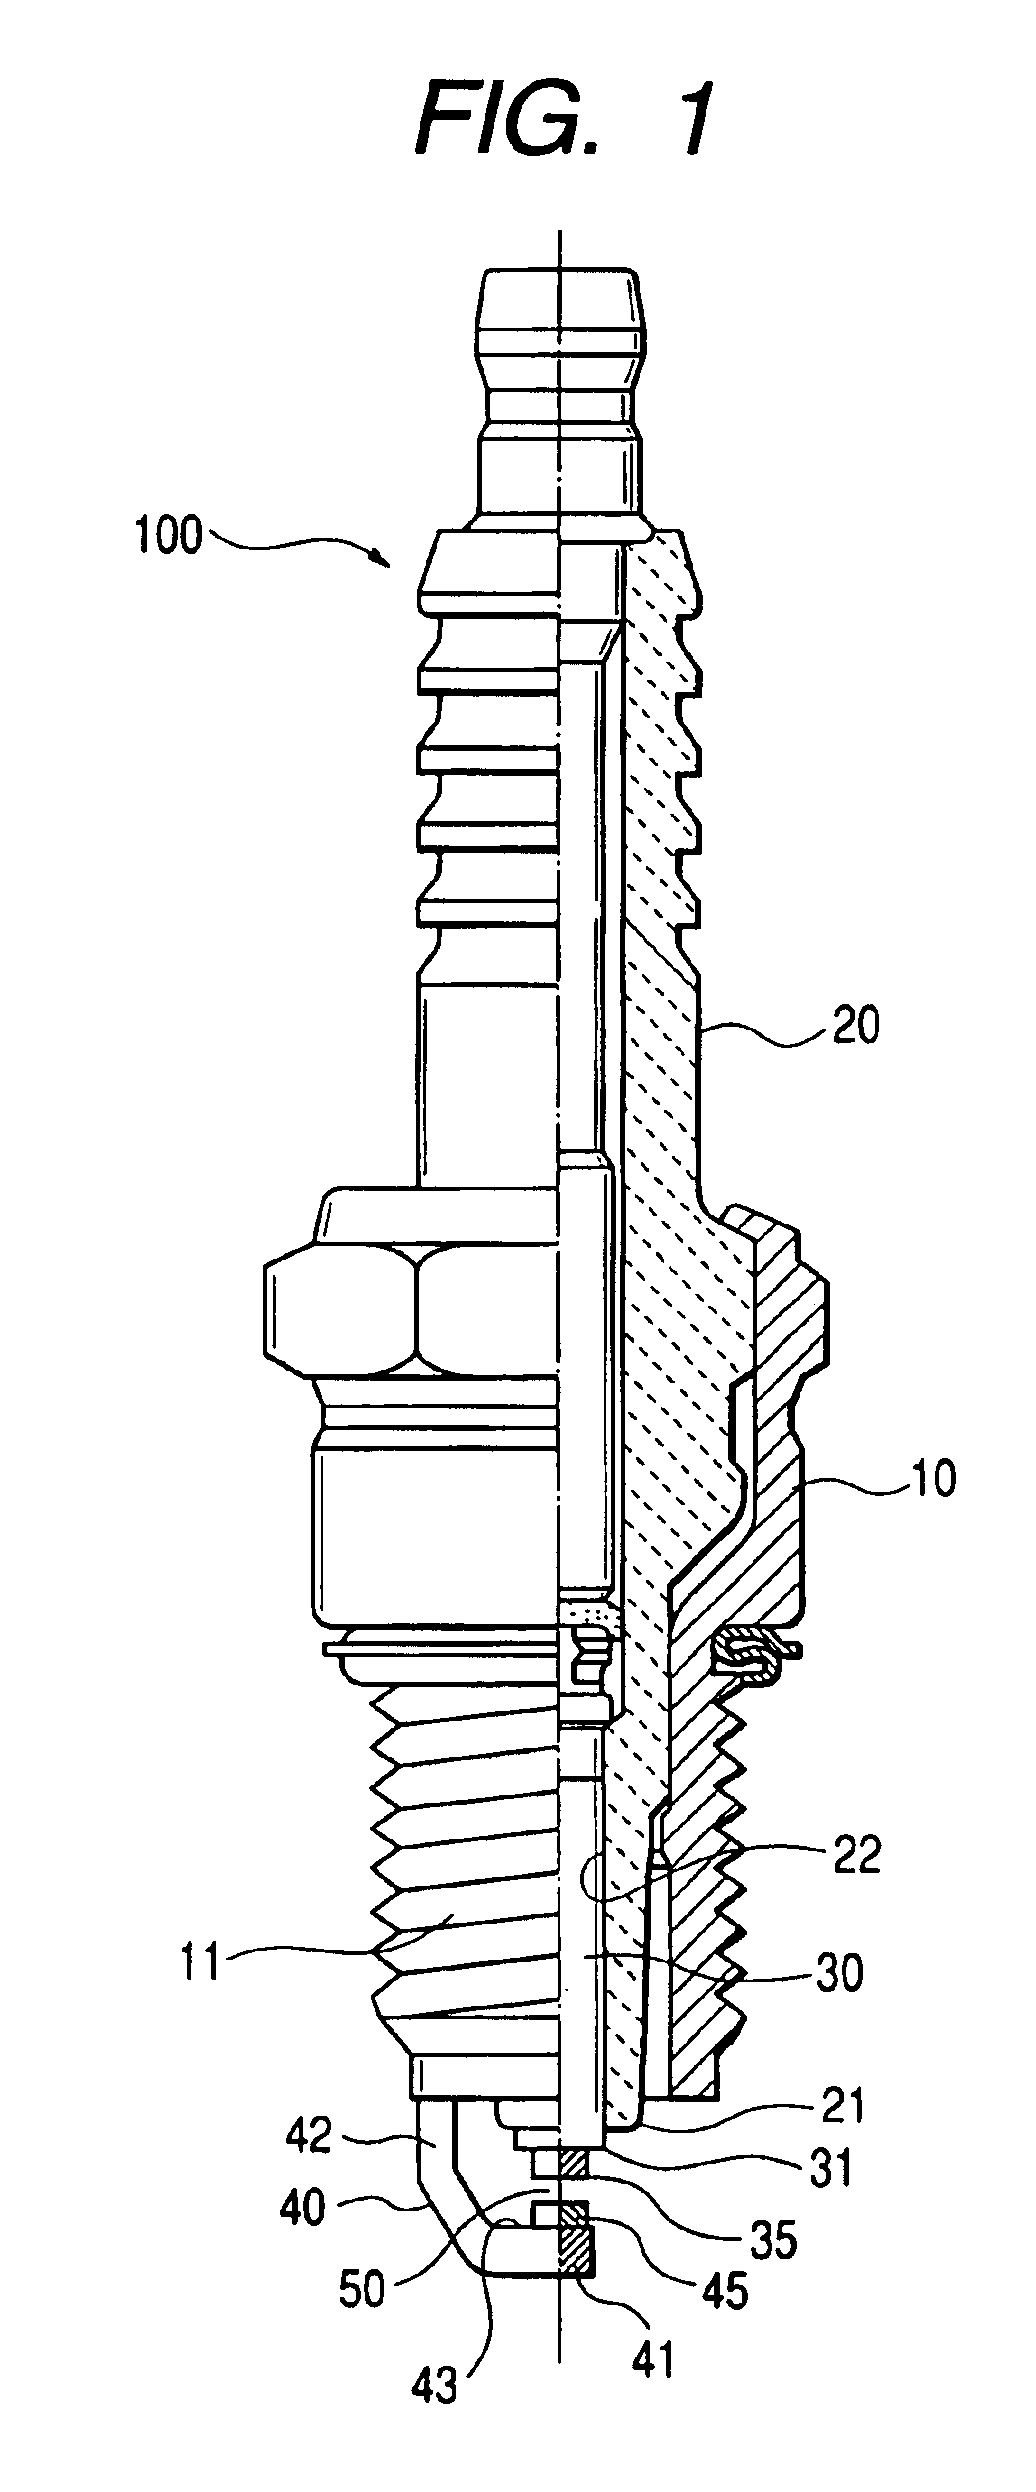 Structure of spark plug designed to provide higher durability and ignitability of fuel